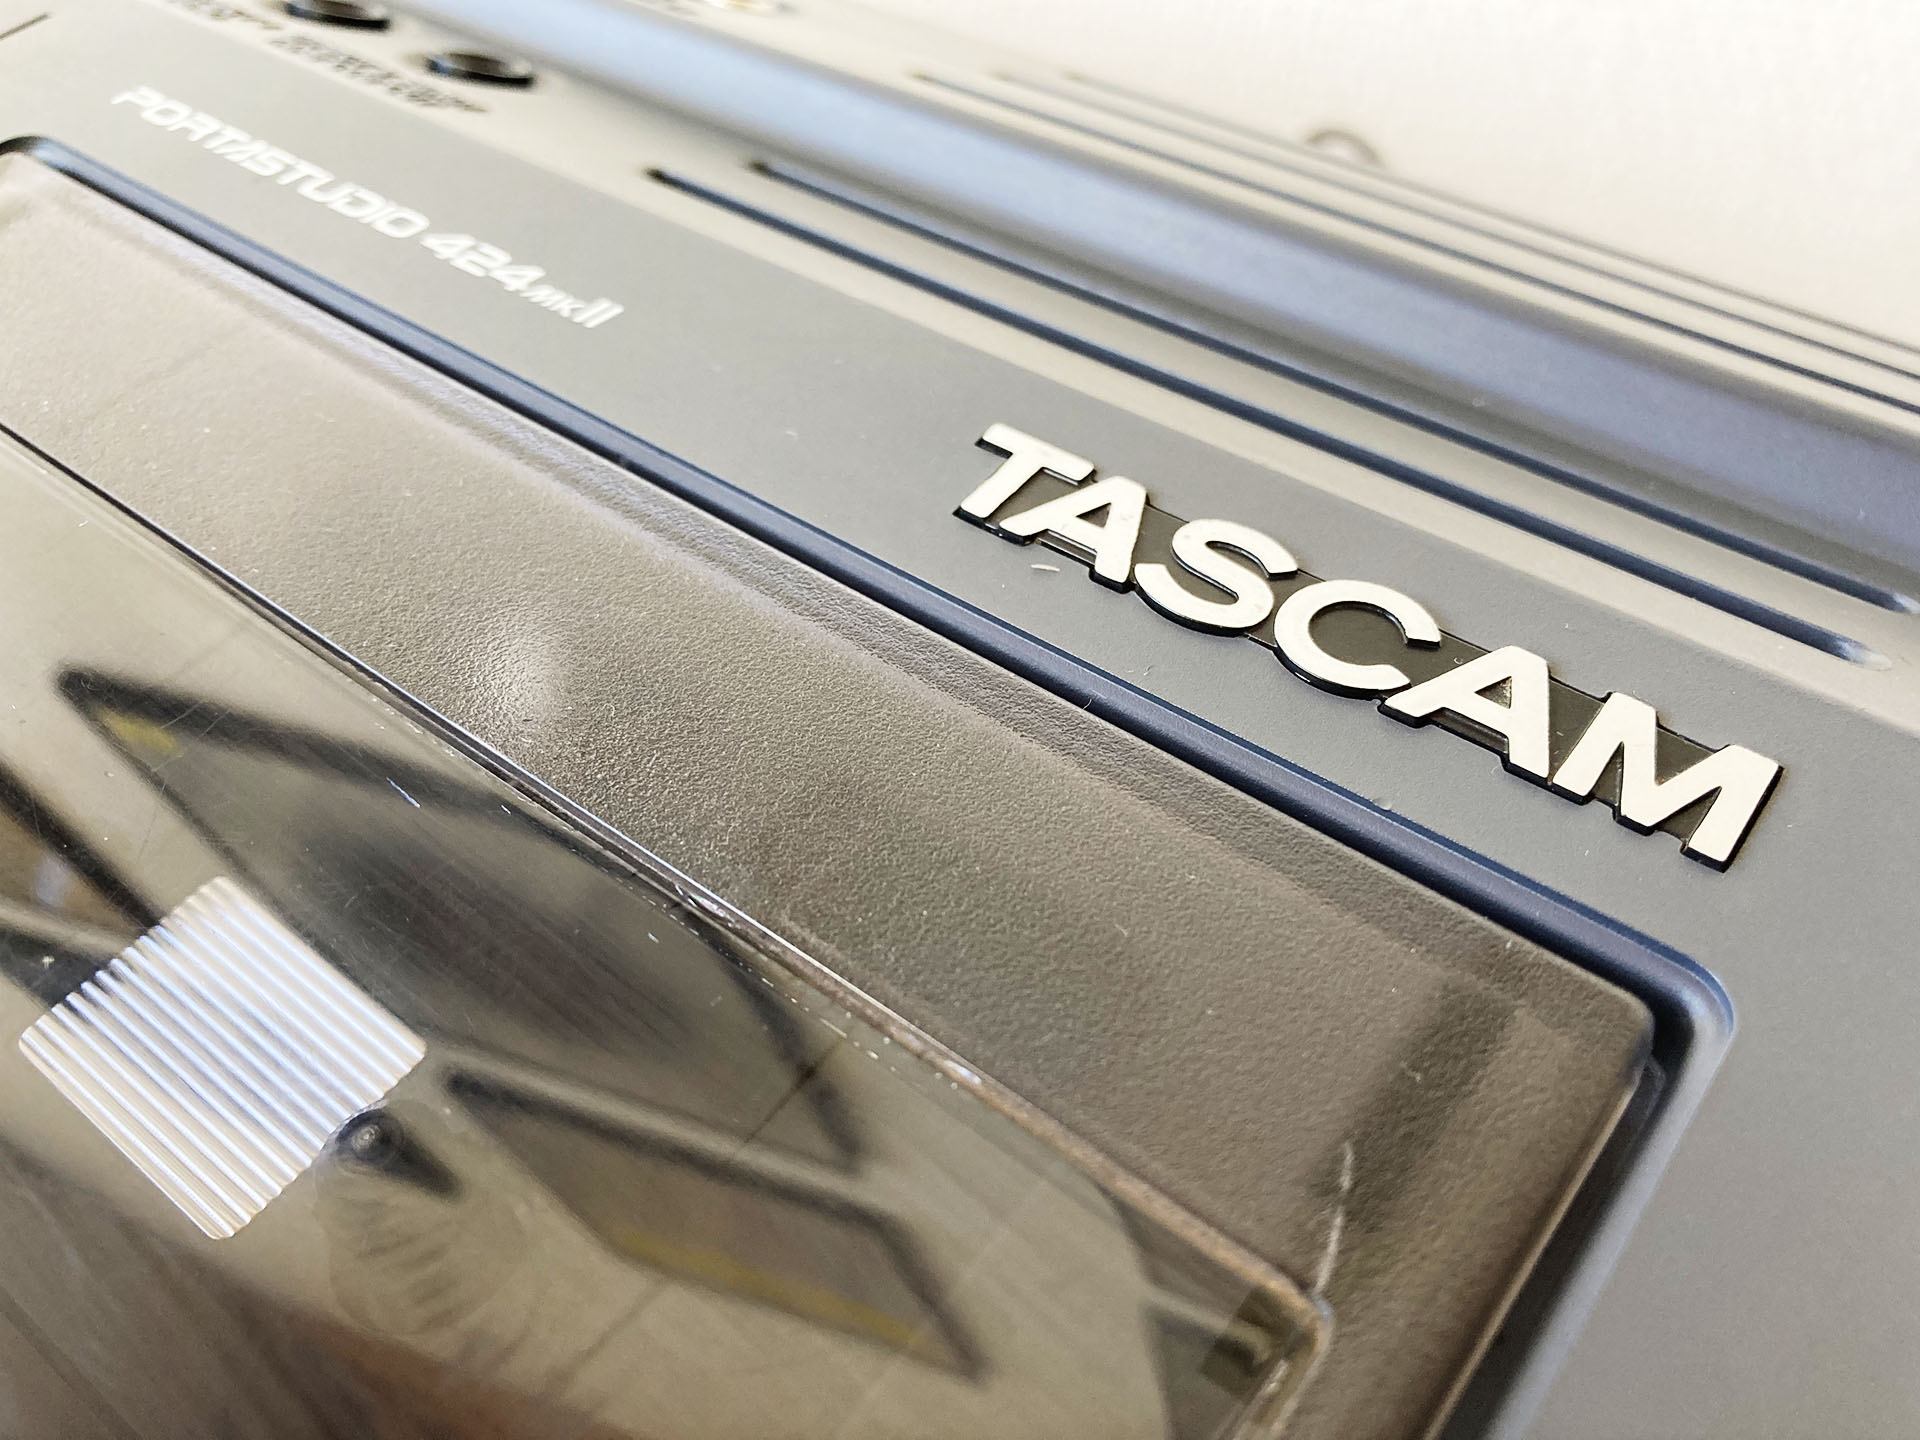 tascam 424 mkii review